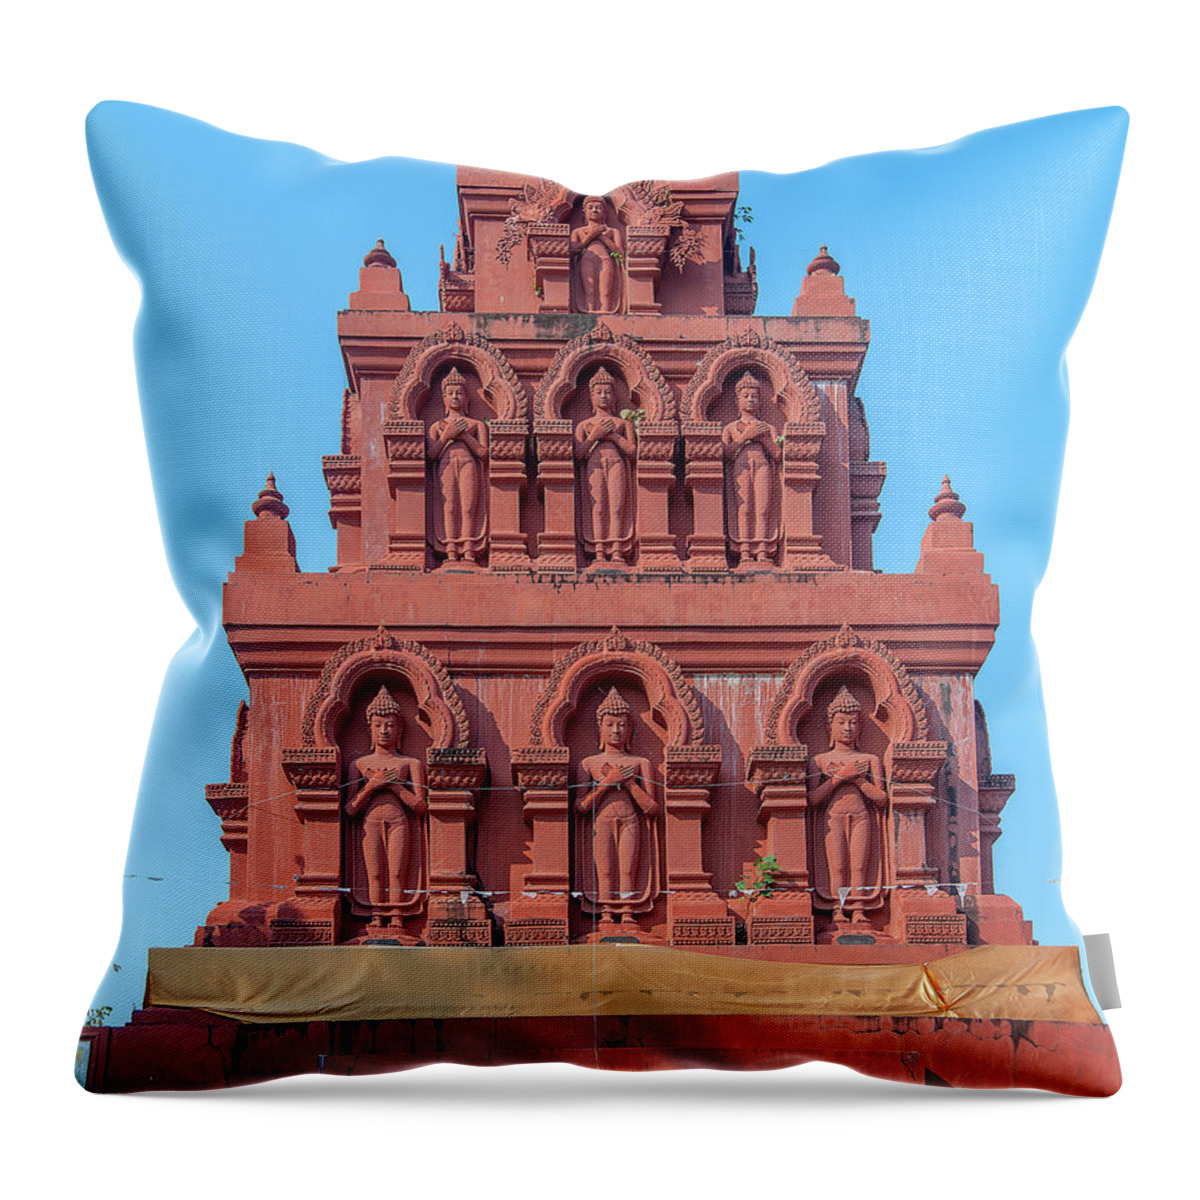 Scenic Throw Pillow featuring the photograph Wat Pa Chedi Liam Phra Chedi Liam Buddha Images DTHCM2673 by Gerry Gantt